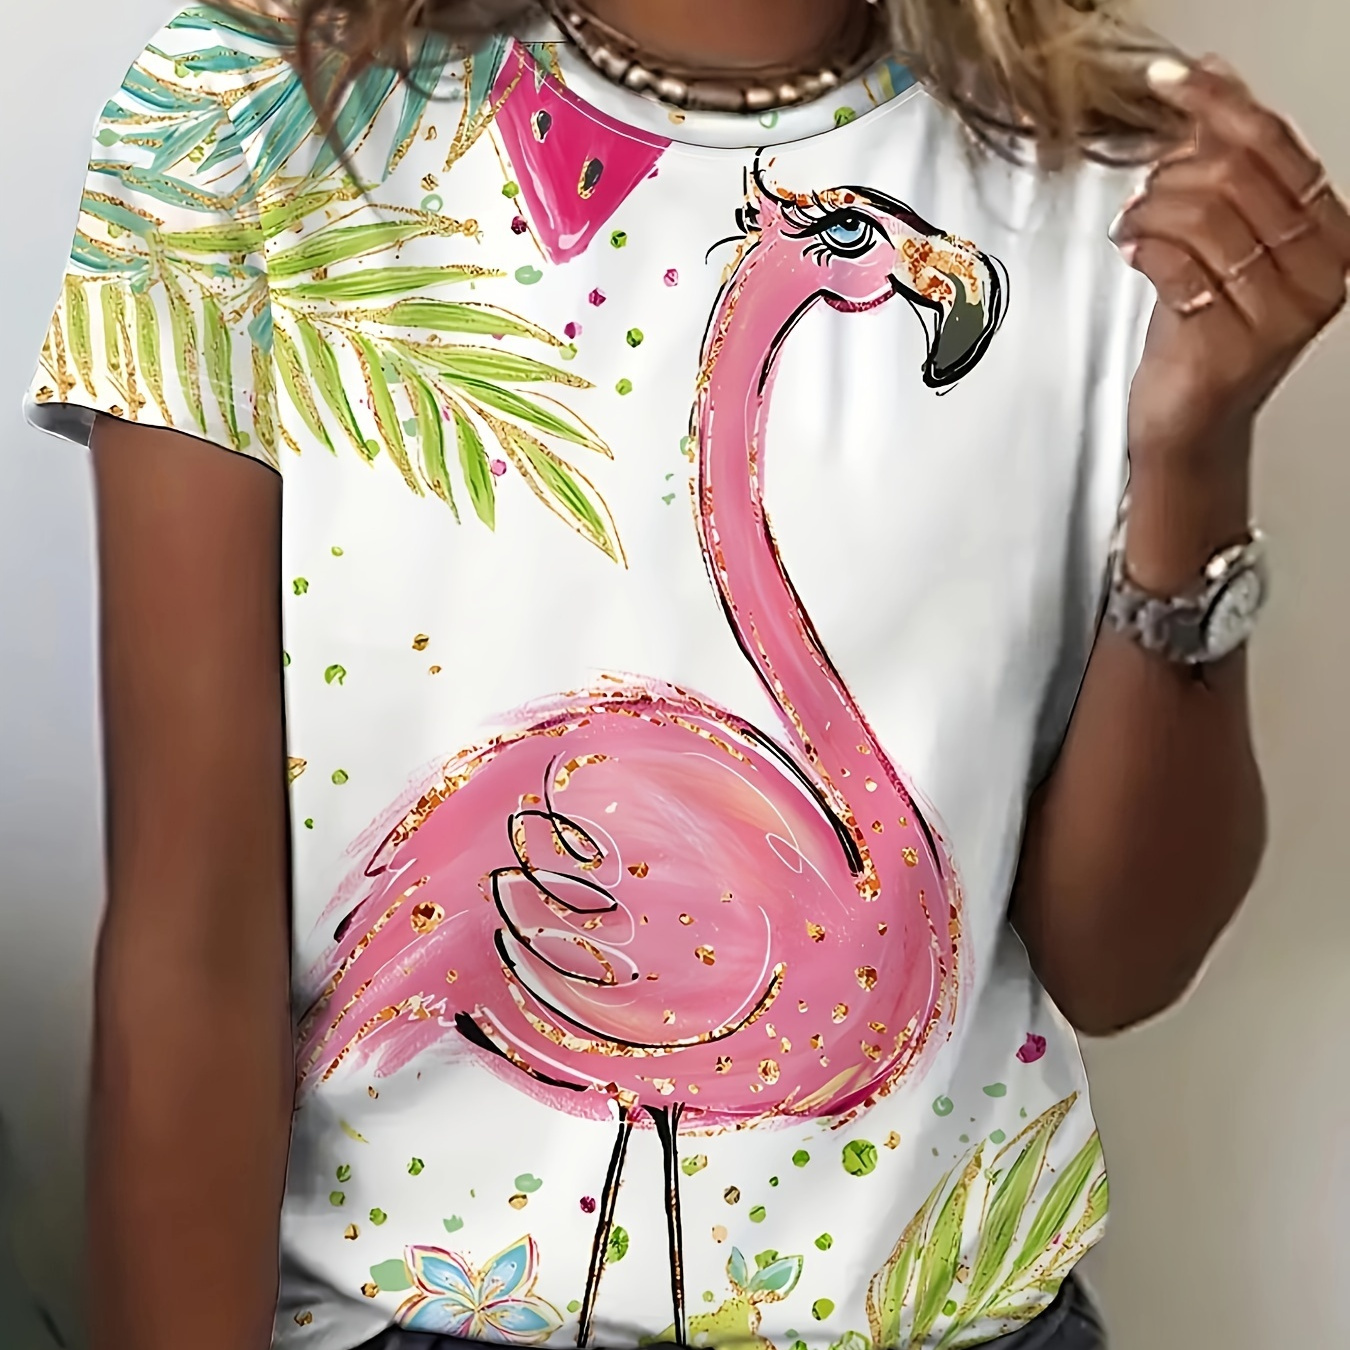 

Flamingo Print T-shirt, Casual Short Sleeve Crew Neck Top For Spring & Summer, Women's Clothing